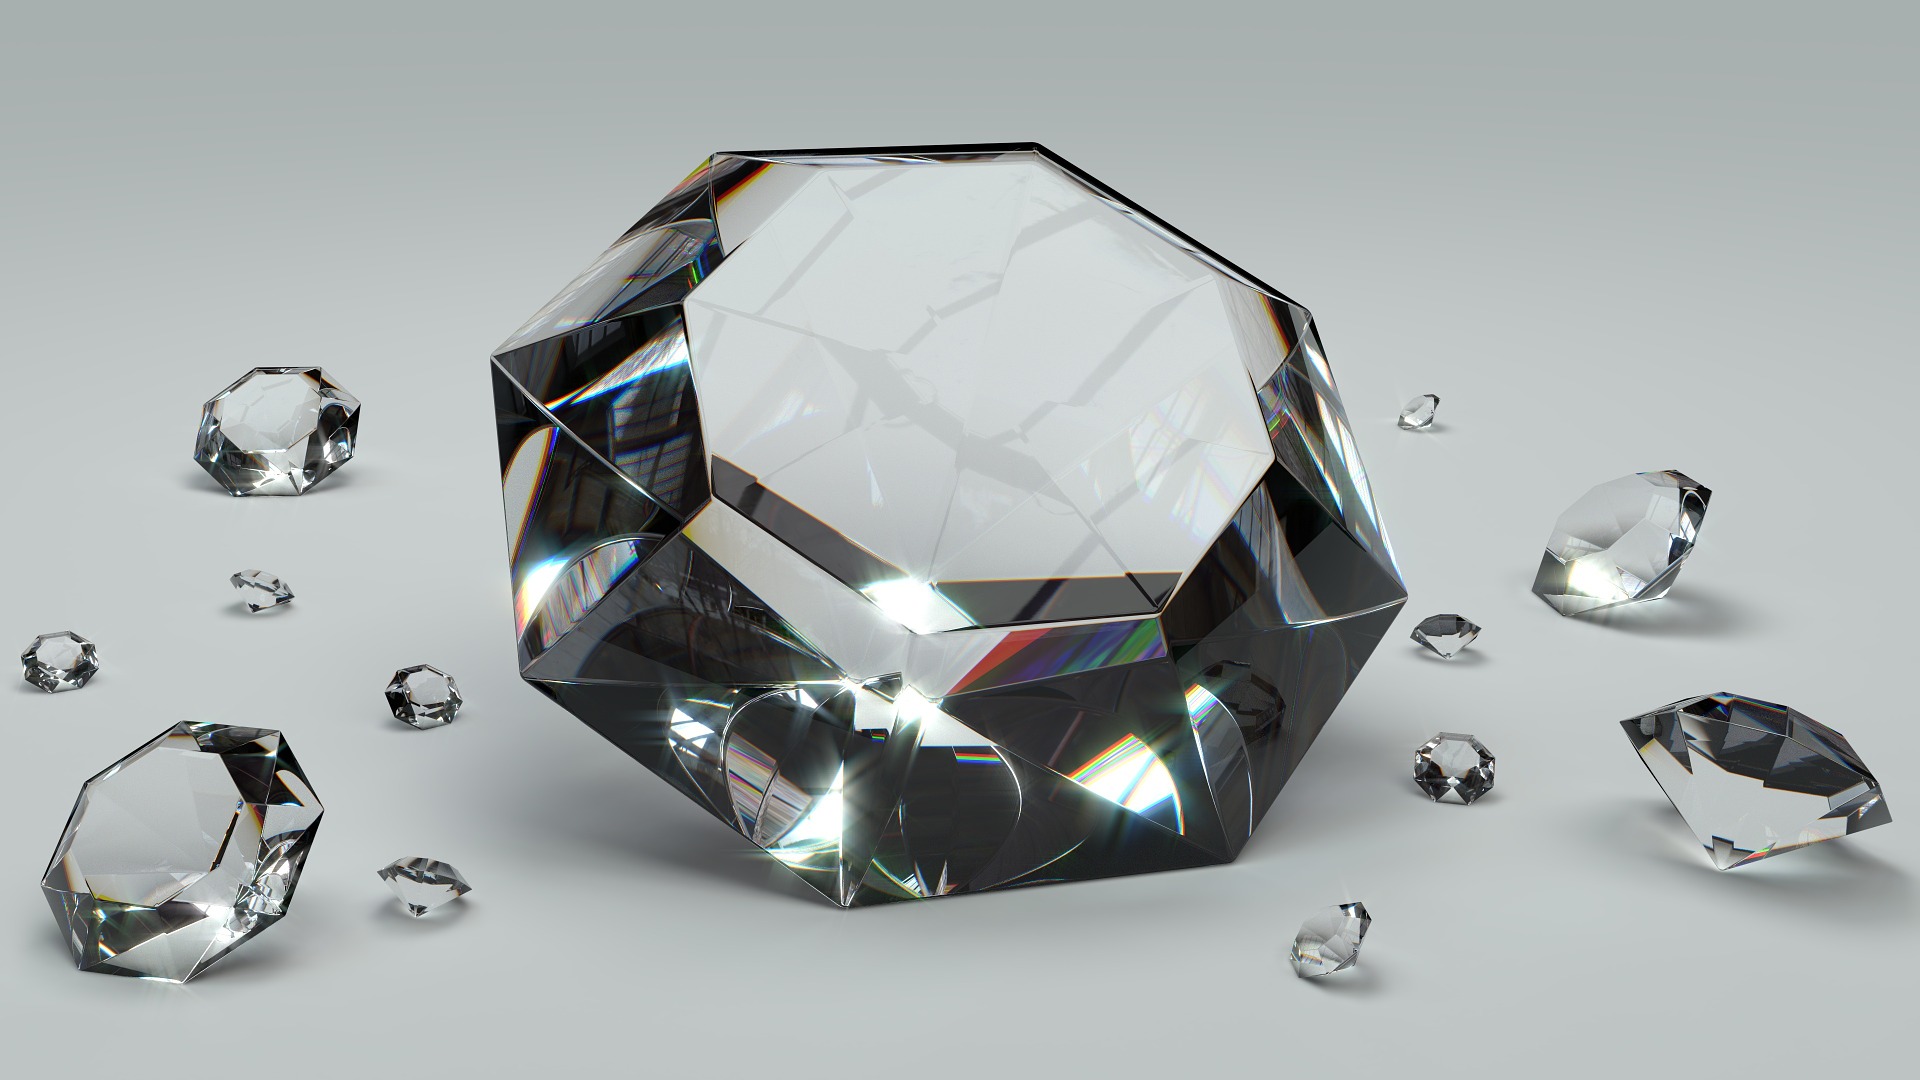 6 Things You Should Know Before Purchasing a Diamond